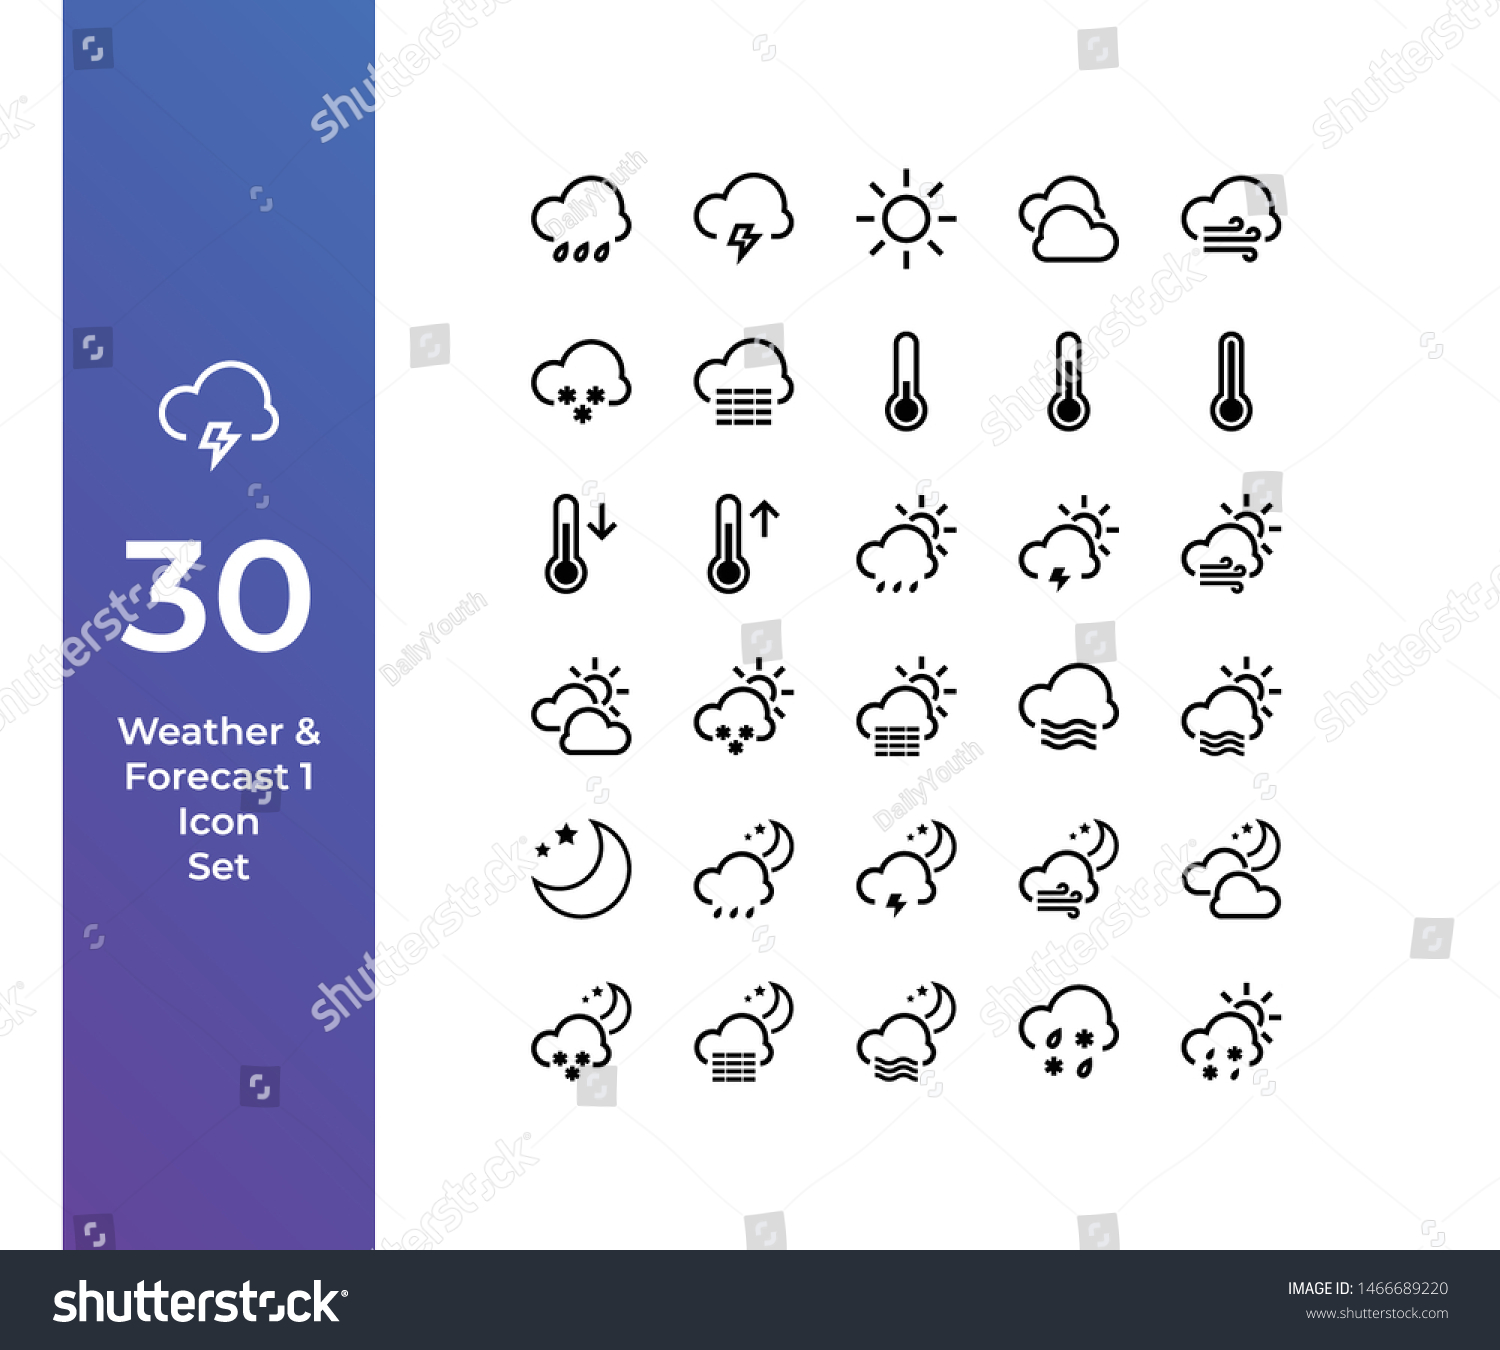 Pixel Perfect Icon Set with Beautiful Hnadcrafted Weather and Forecast Icon Set #1466689220